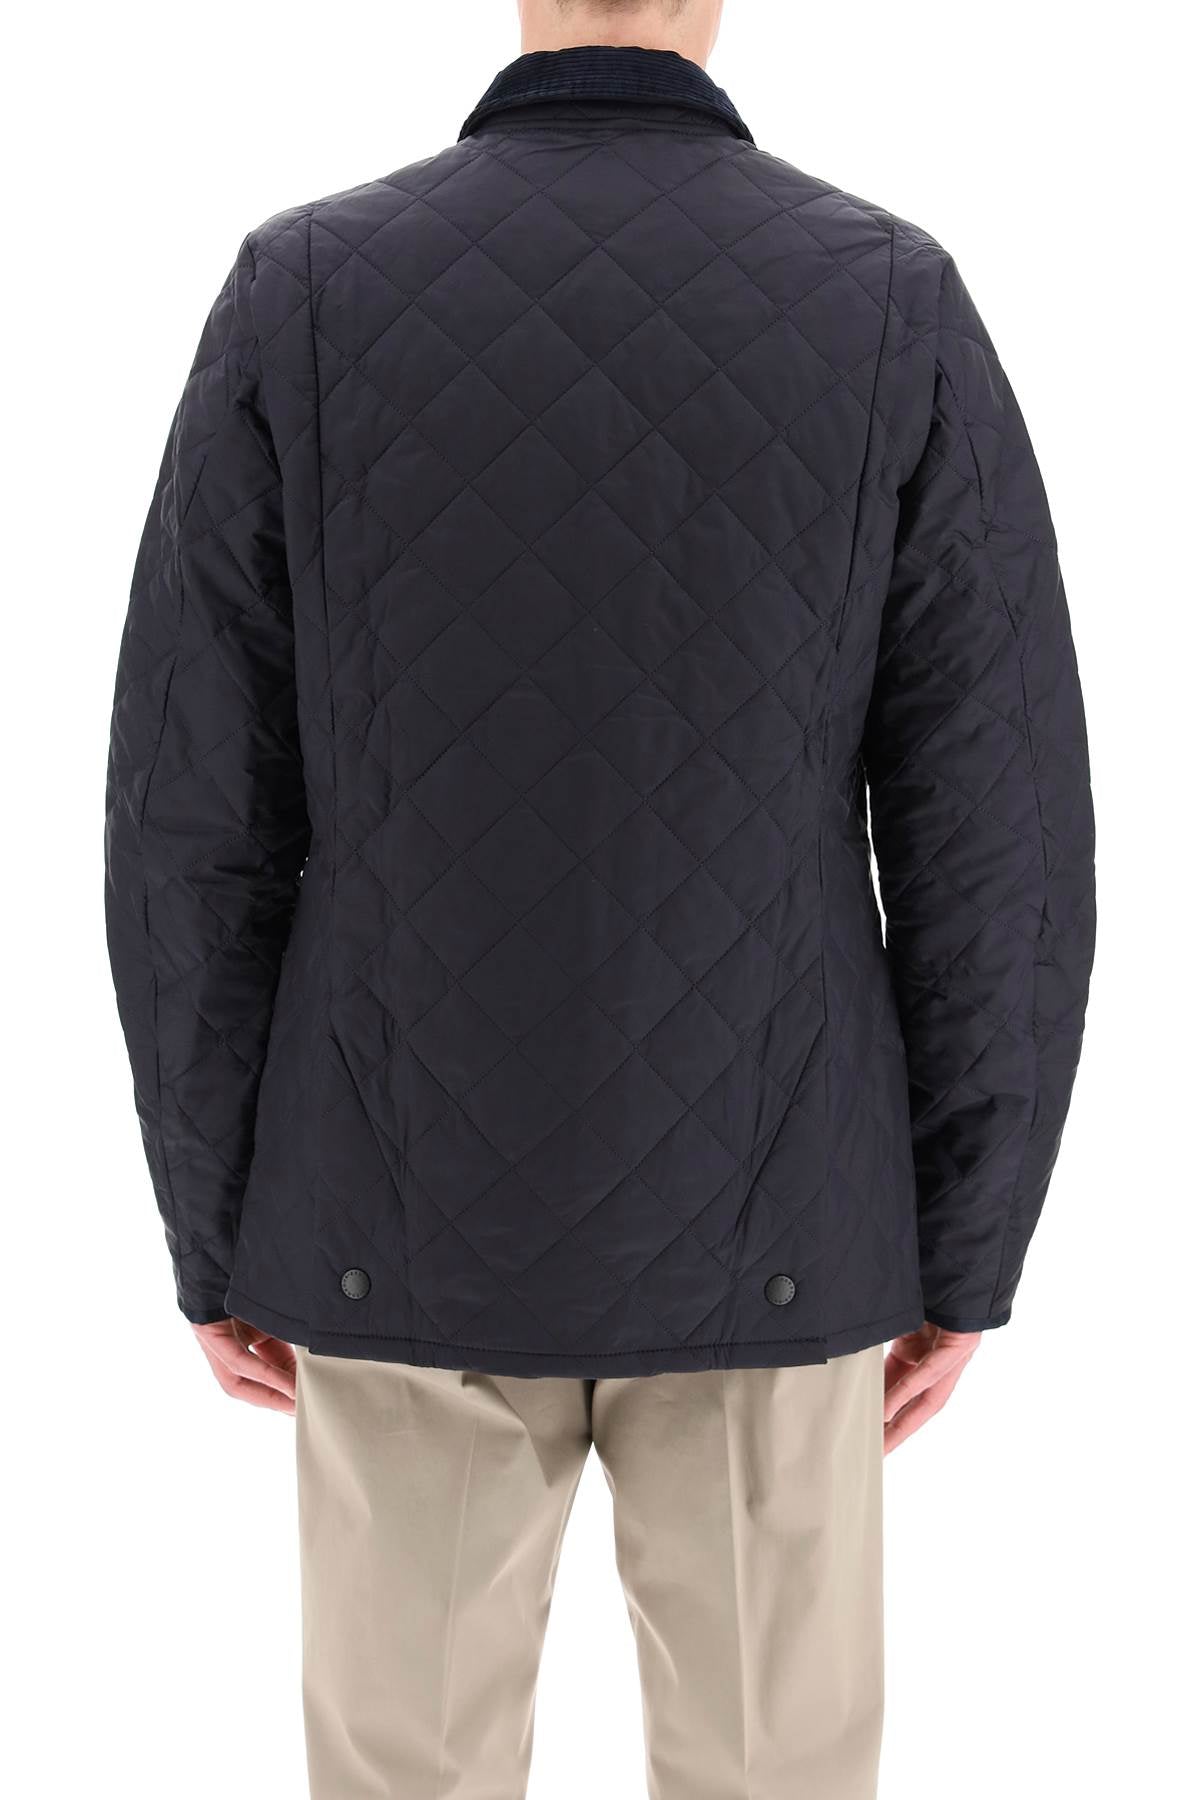 Barbour heritage liddesdale quilted jacket-2